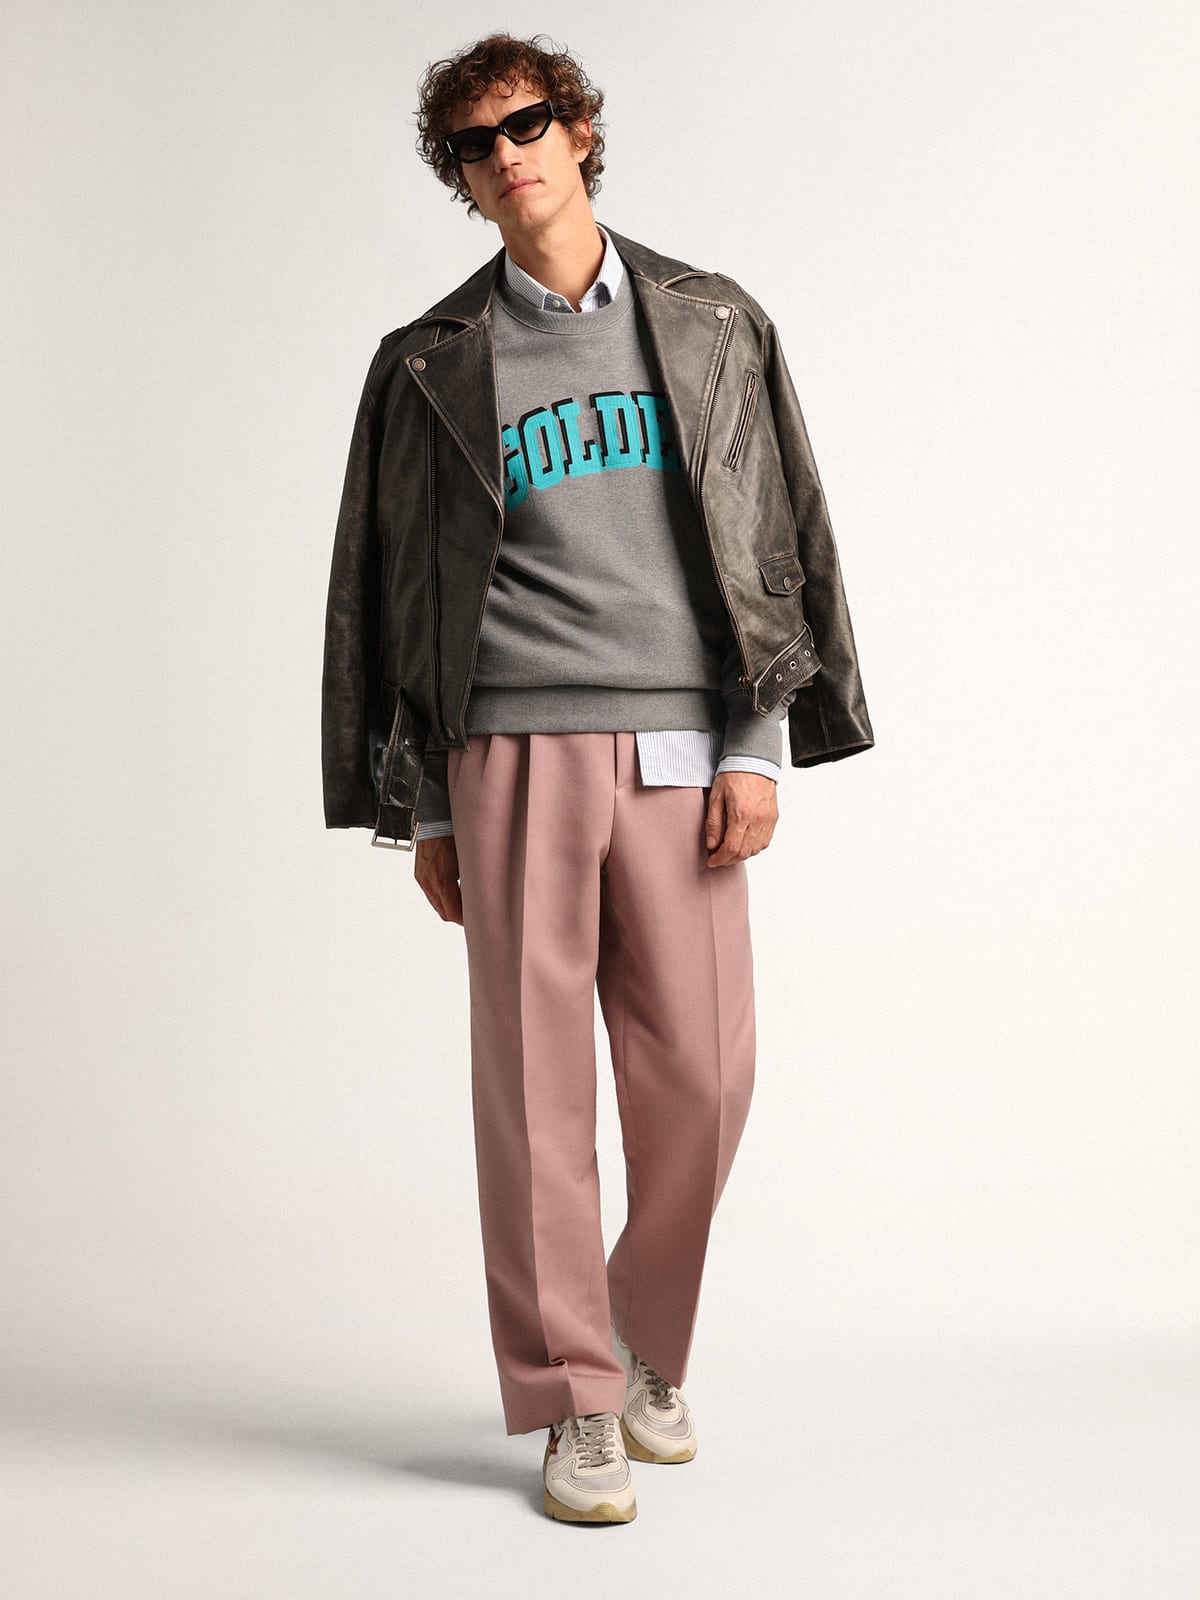 Golden Goose - Gray Journey Collection sweatshirt with contrasting turquoise Golden lettering in 